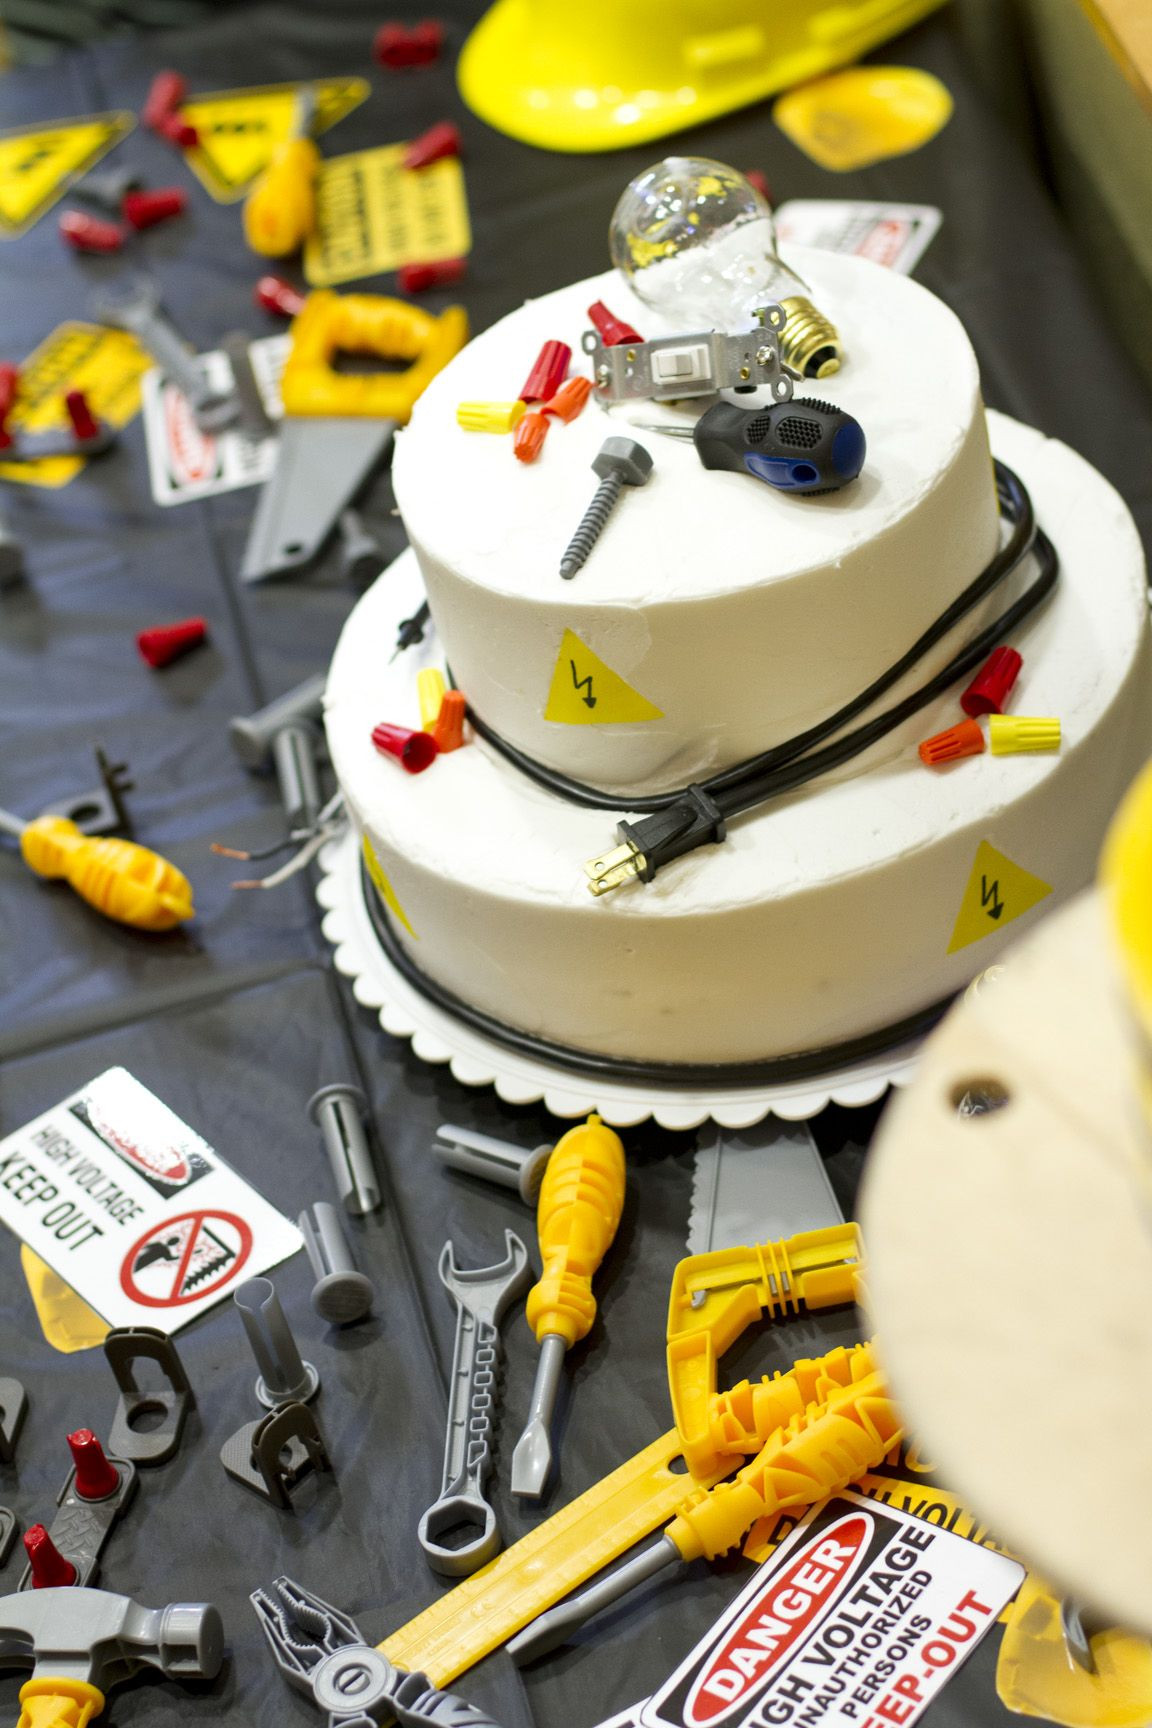 Electrical Engineering Graduation Party Ideas
 Electrician cake in 2019